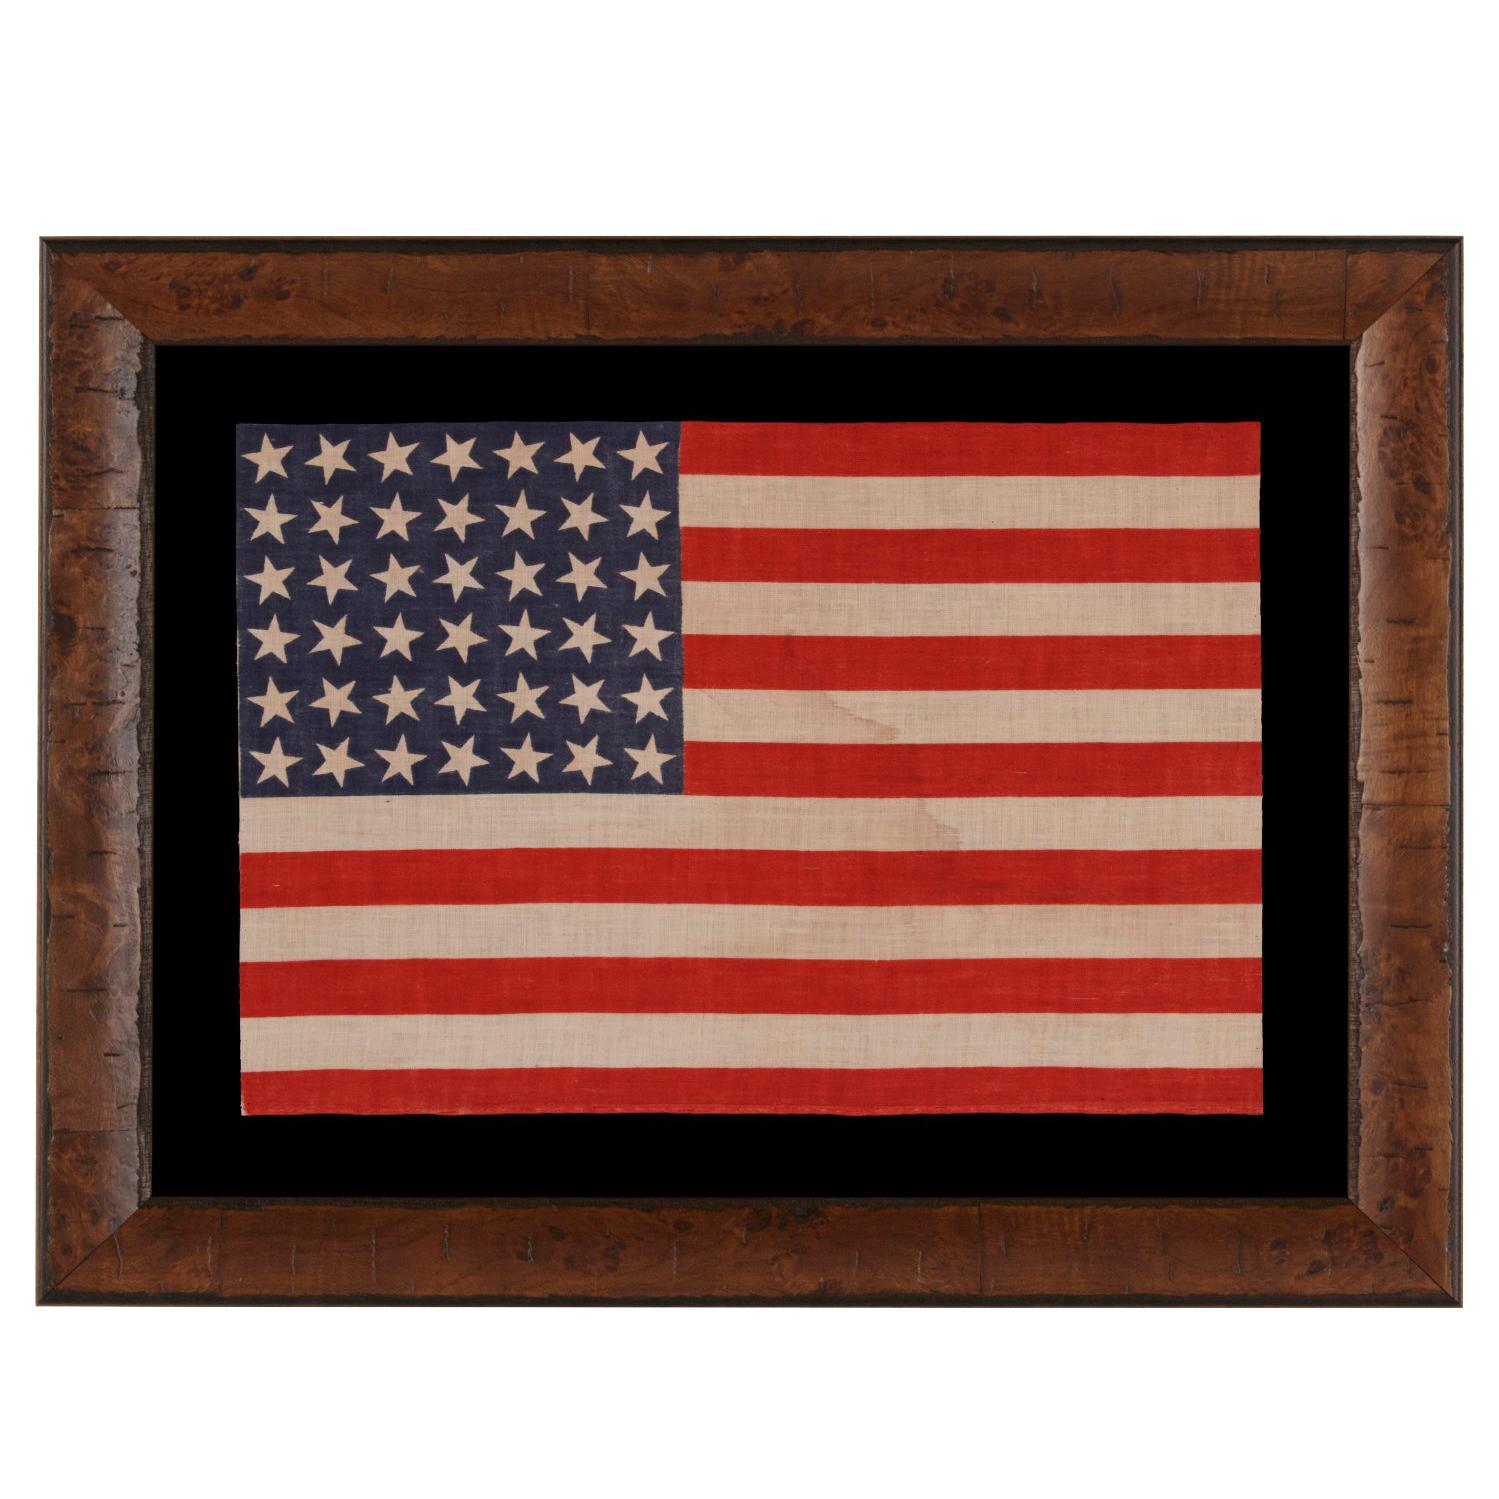 42 Stars, an Unofficial Star Count, on an Antique American Flag